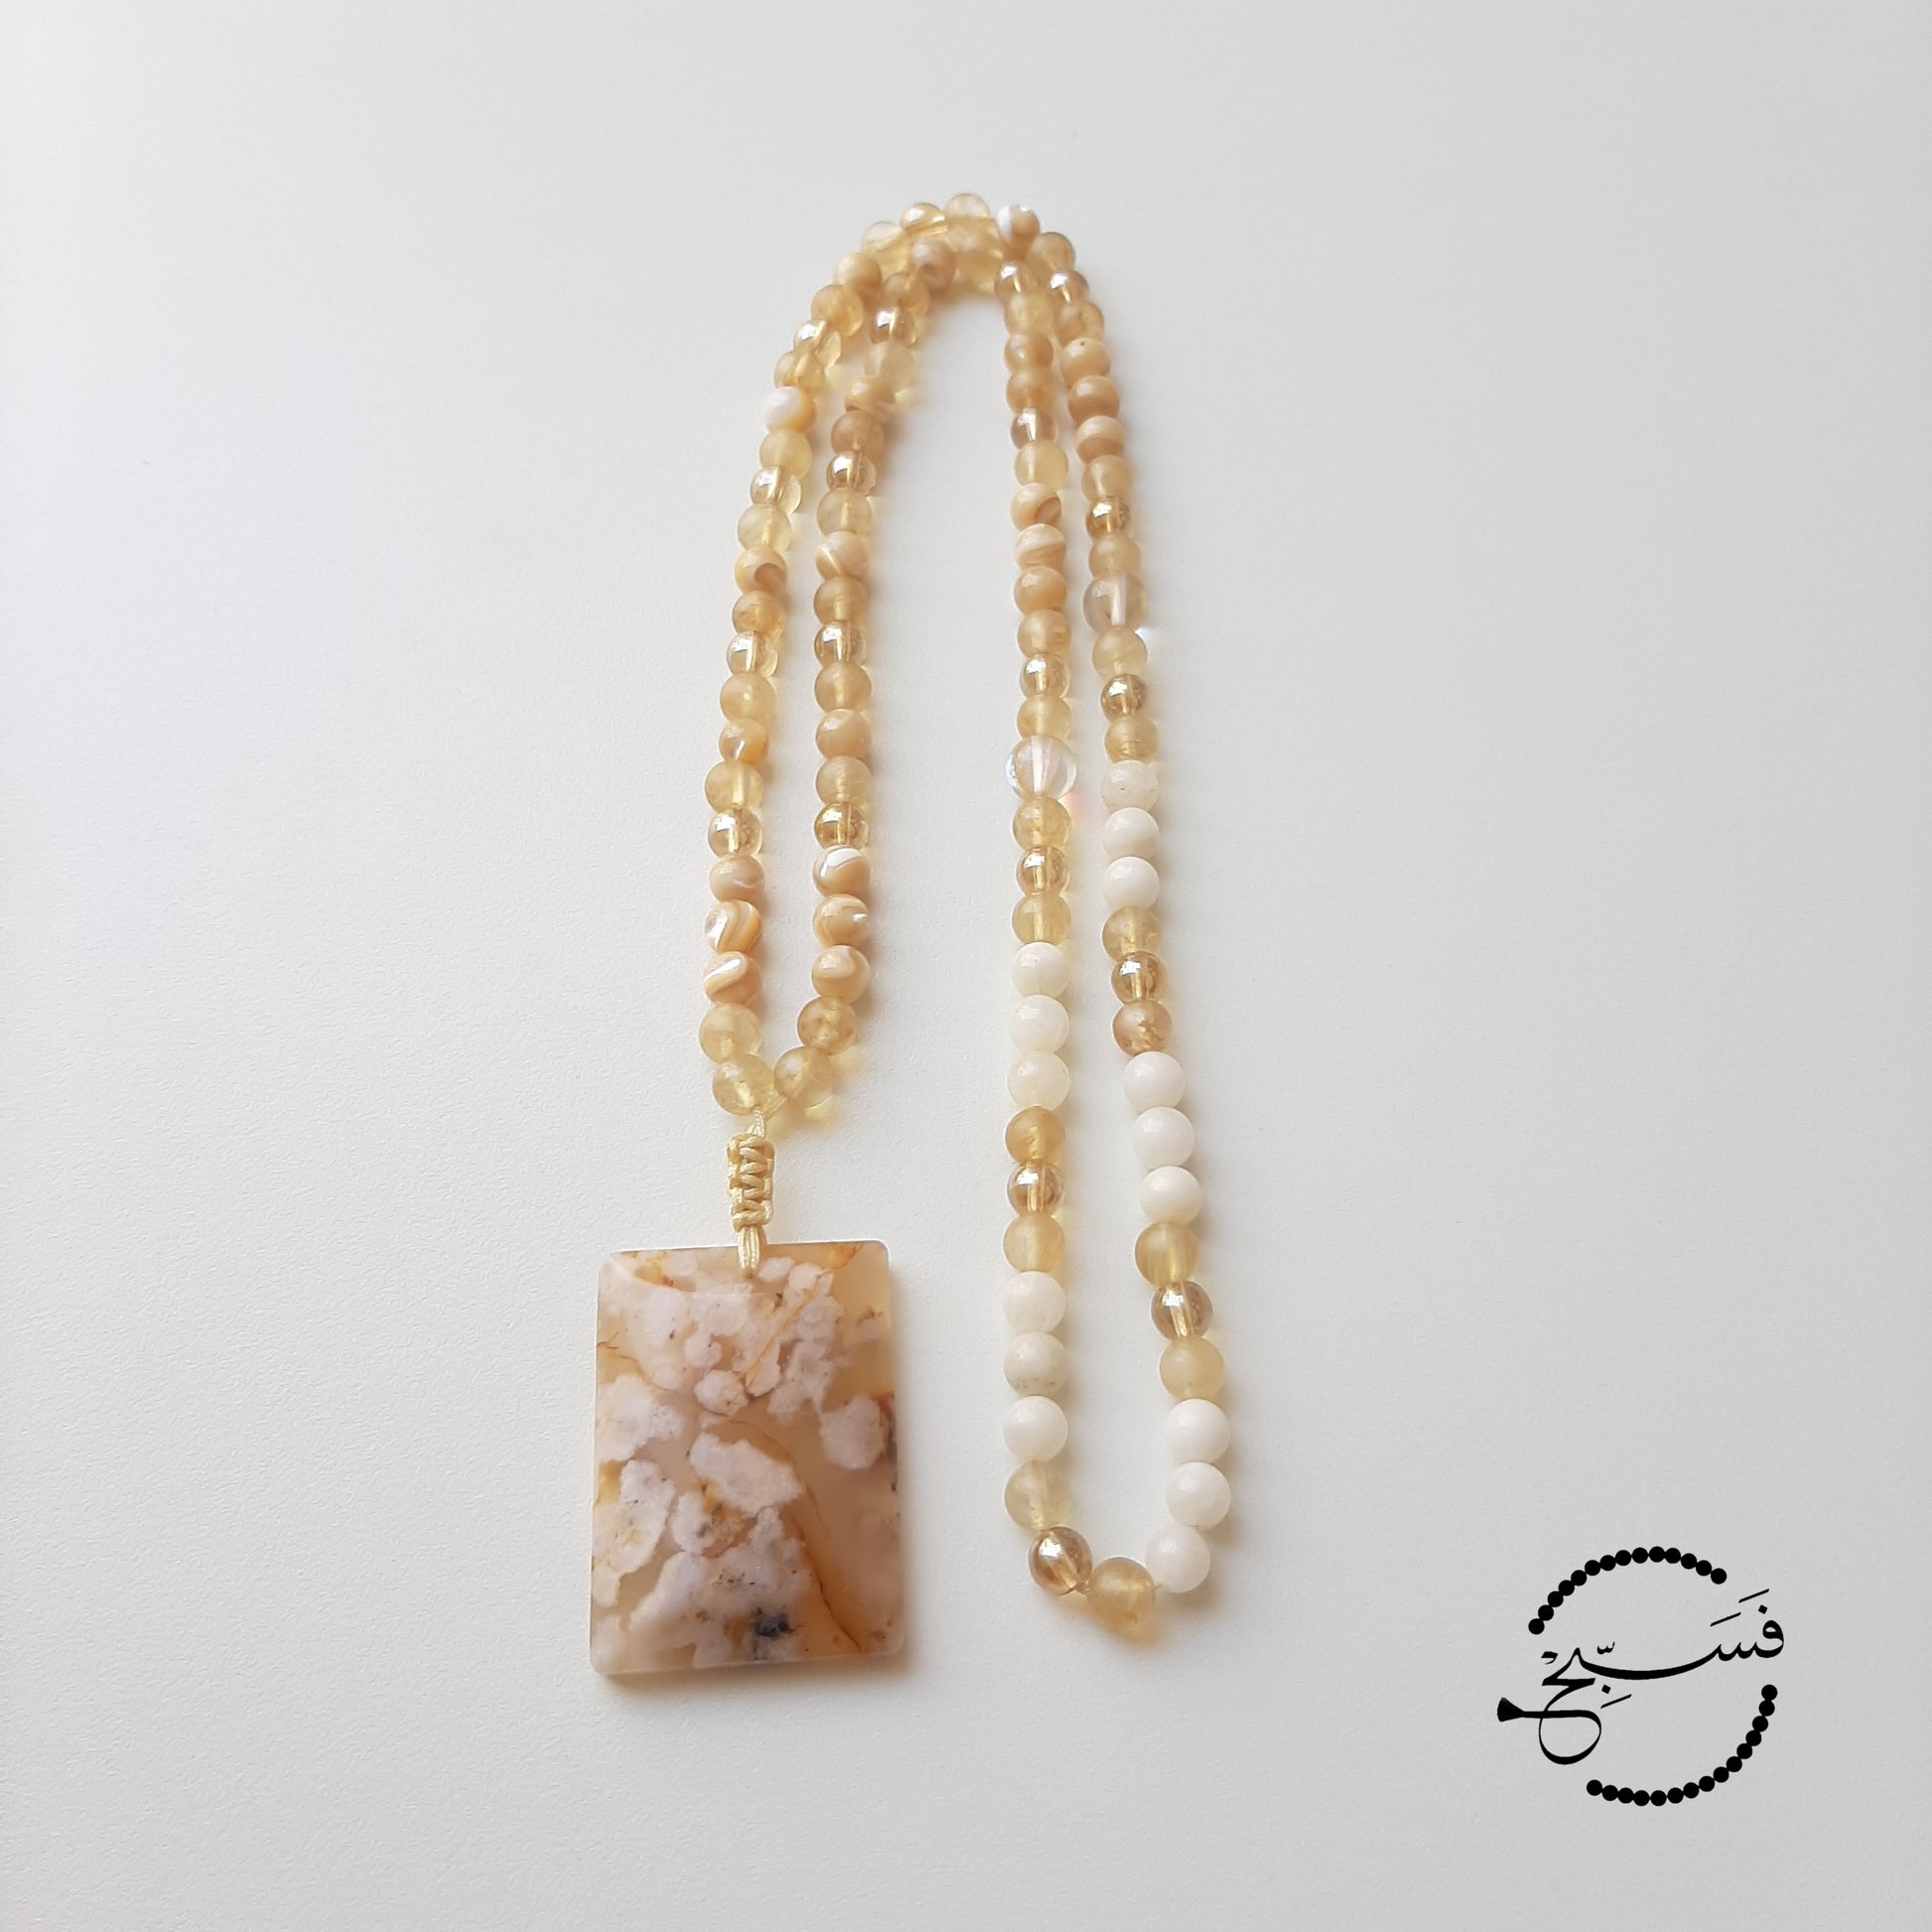 This chunk of cherry blossom agate needed no embellishments! Smooth and cool to the touch. This one feels really good in your hands. The beads are a mix of smoky quartz and trochus shell, and they match beautifully with the pendant.  Packaged in a luxurious pouch and a gift box.  99 beads